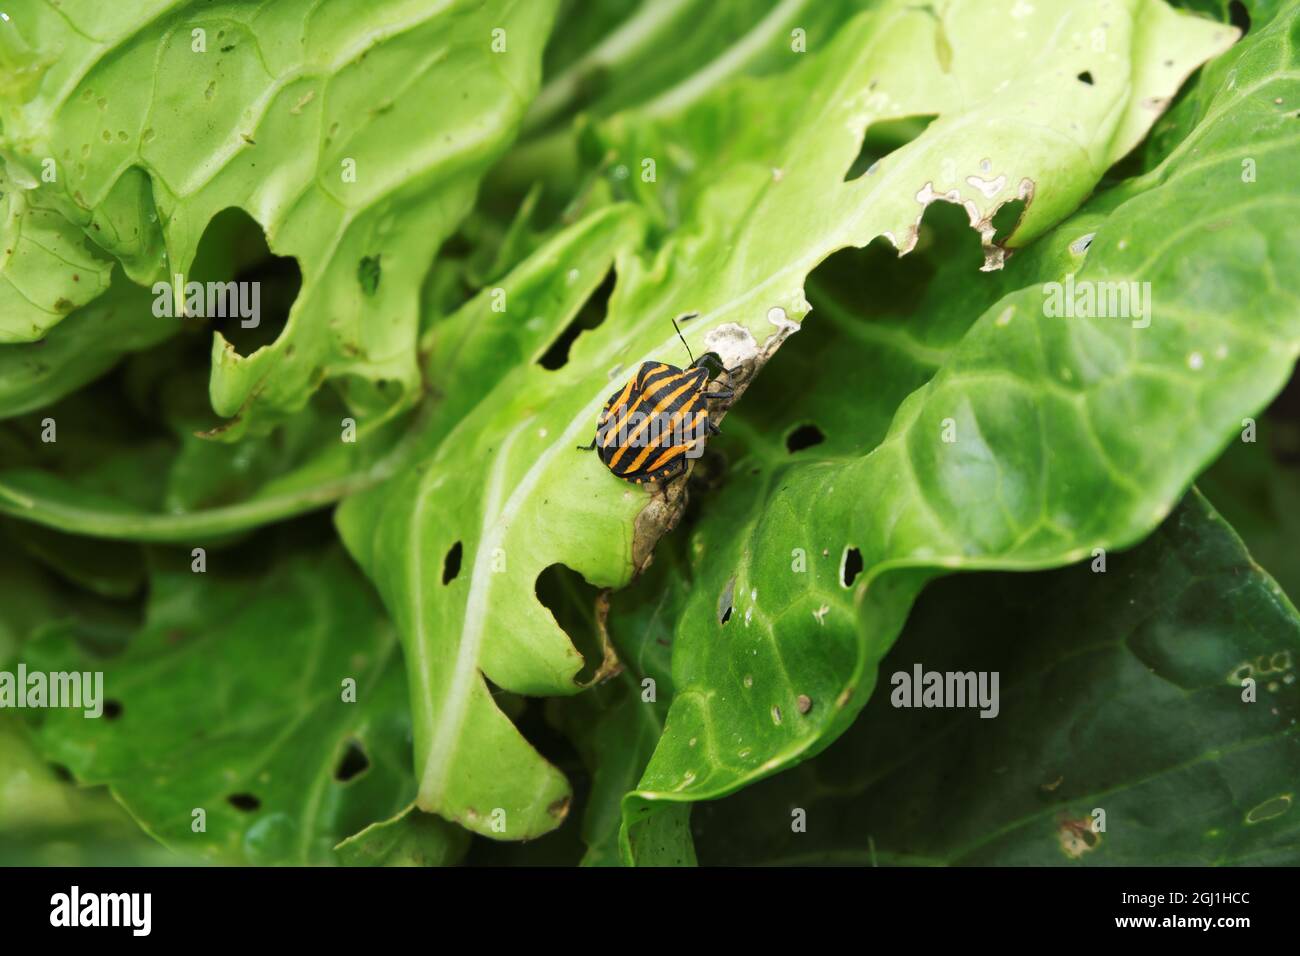 Pentatomidae. The pest beetle is orange with a black stripe eating a cabbage leaf in the garden. Selective focus. Stock Photo